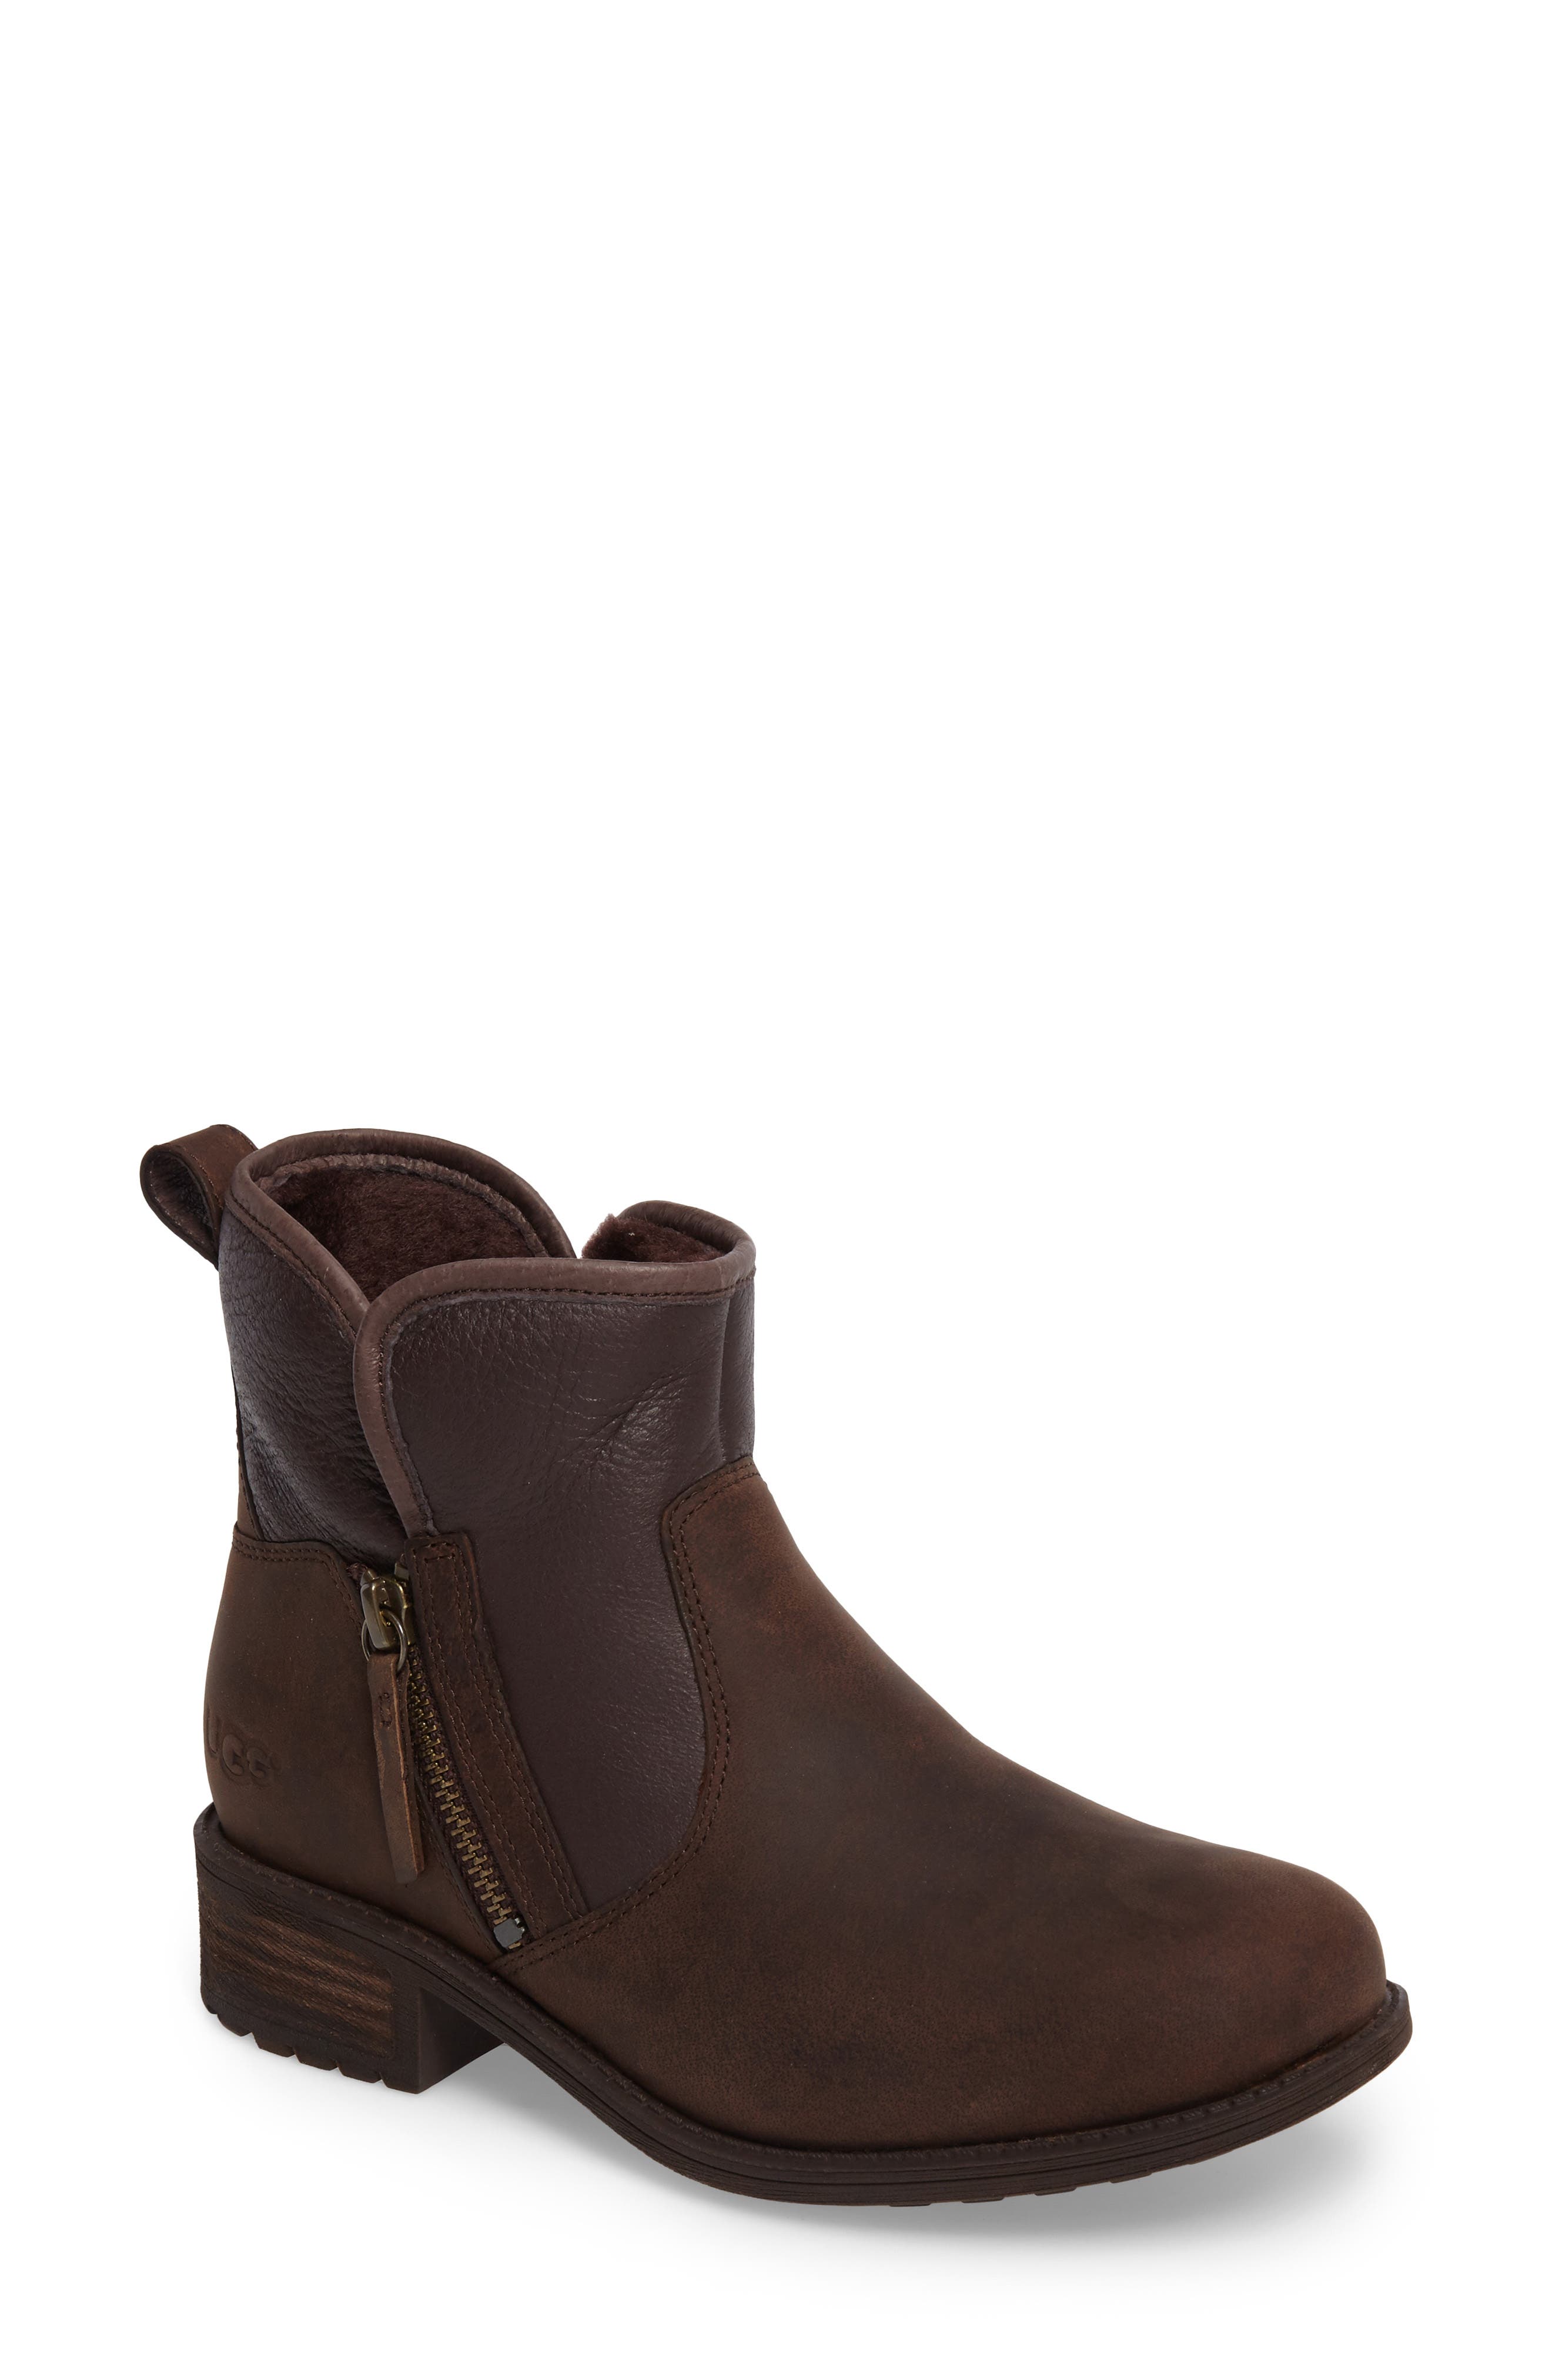 lavelle ugg boots